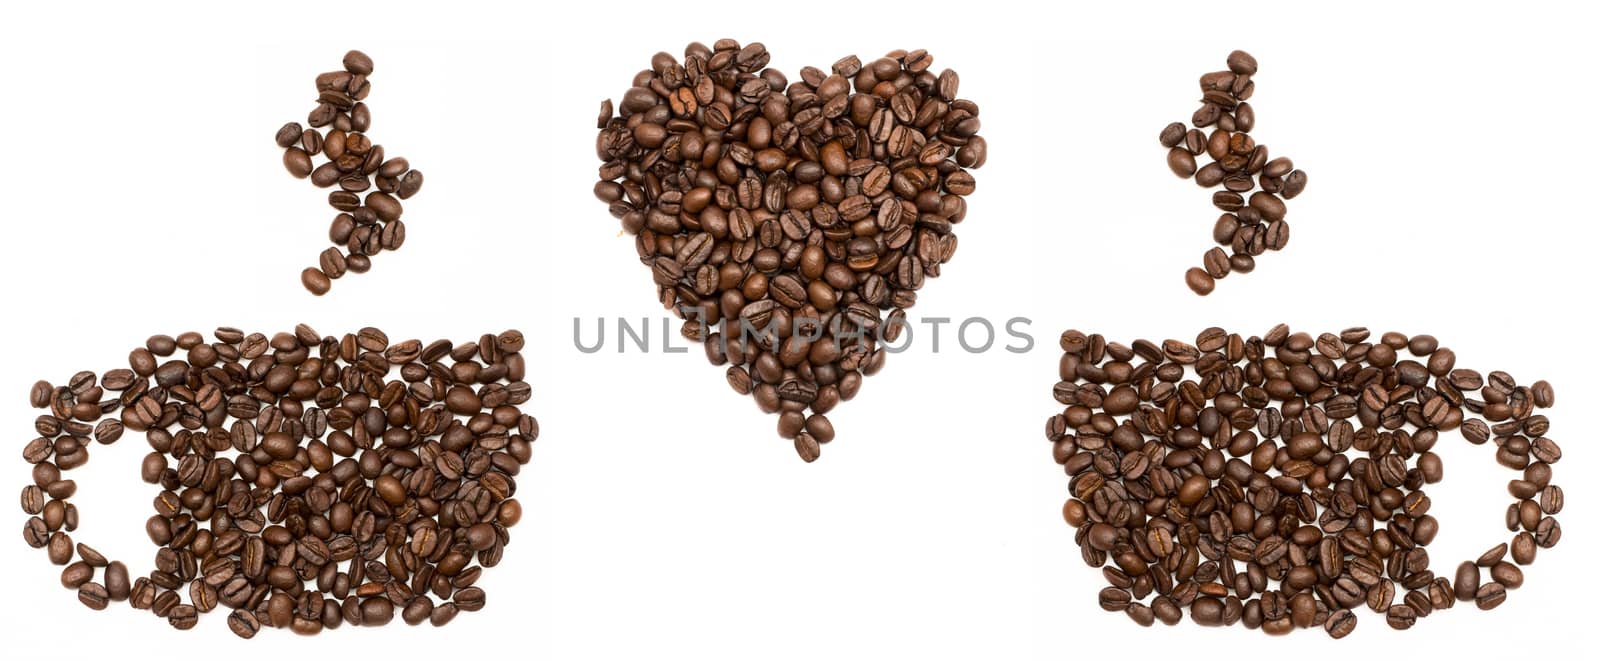 Beans are stacked in the shape of cups and heart. Isolated on white background